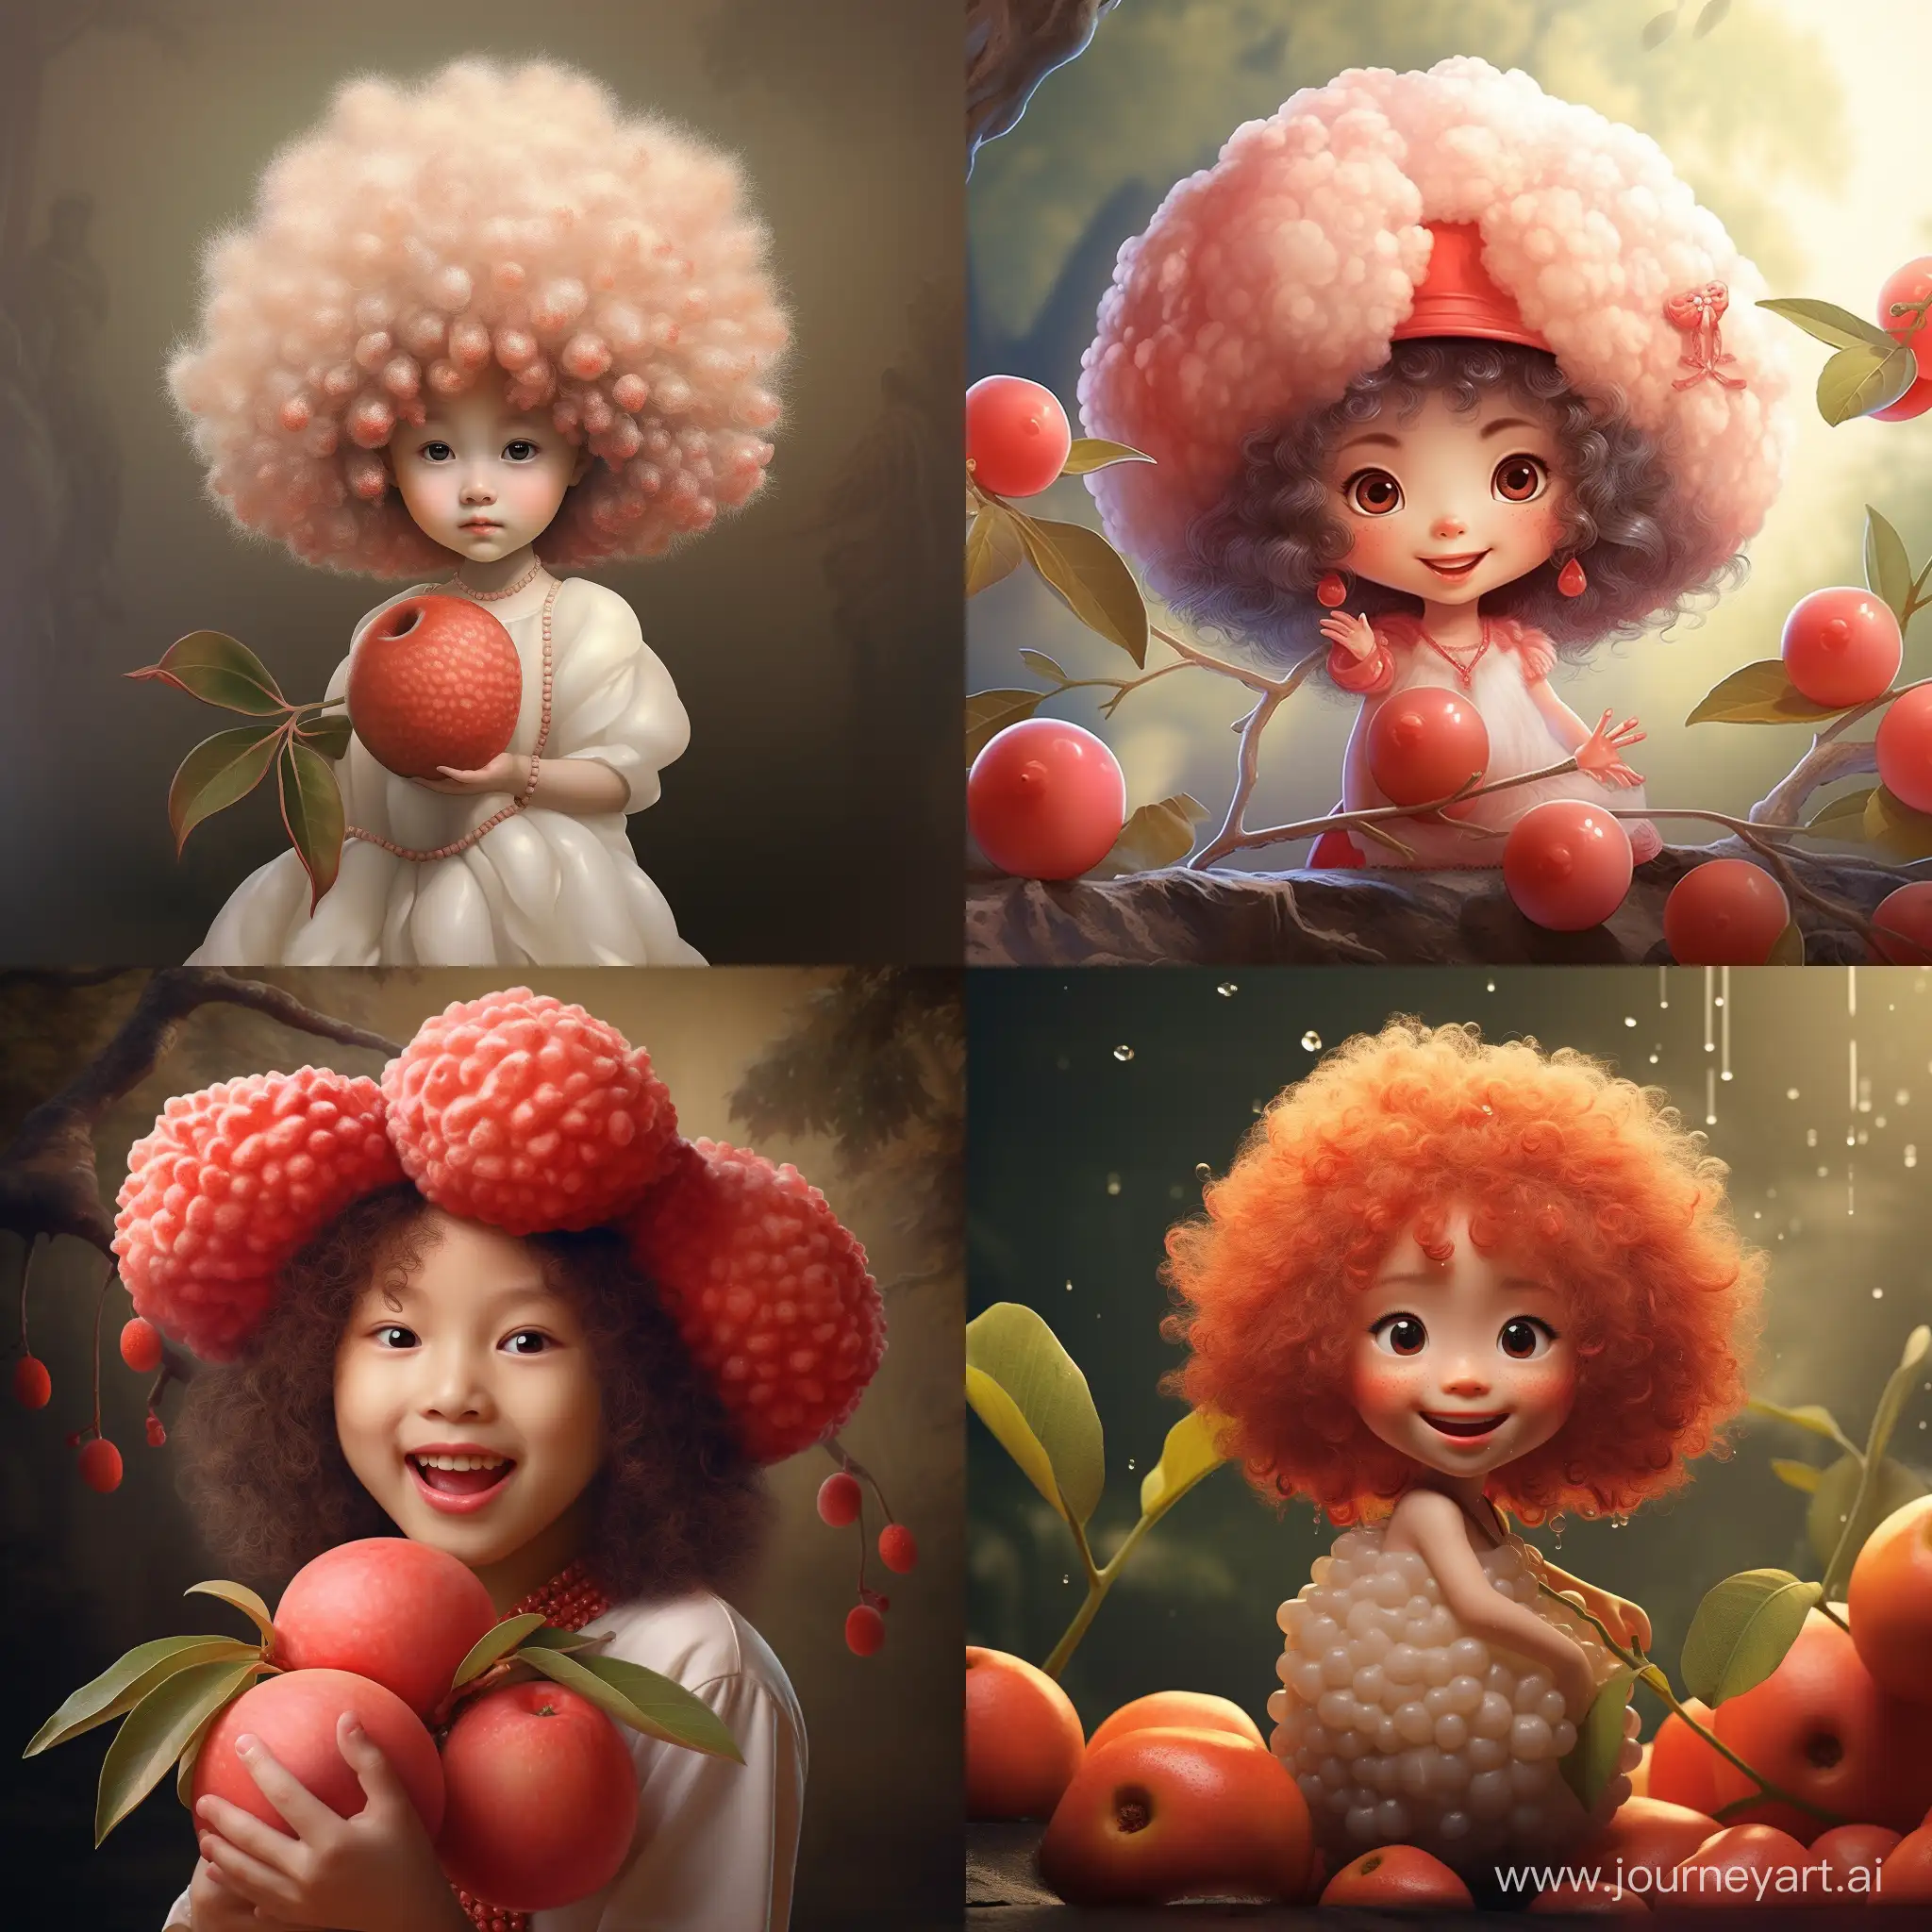 The cute lychee shows part of its pulp, and she looks full of energy and knowledge.